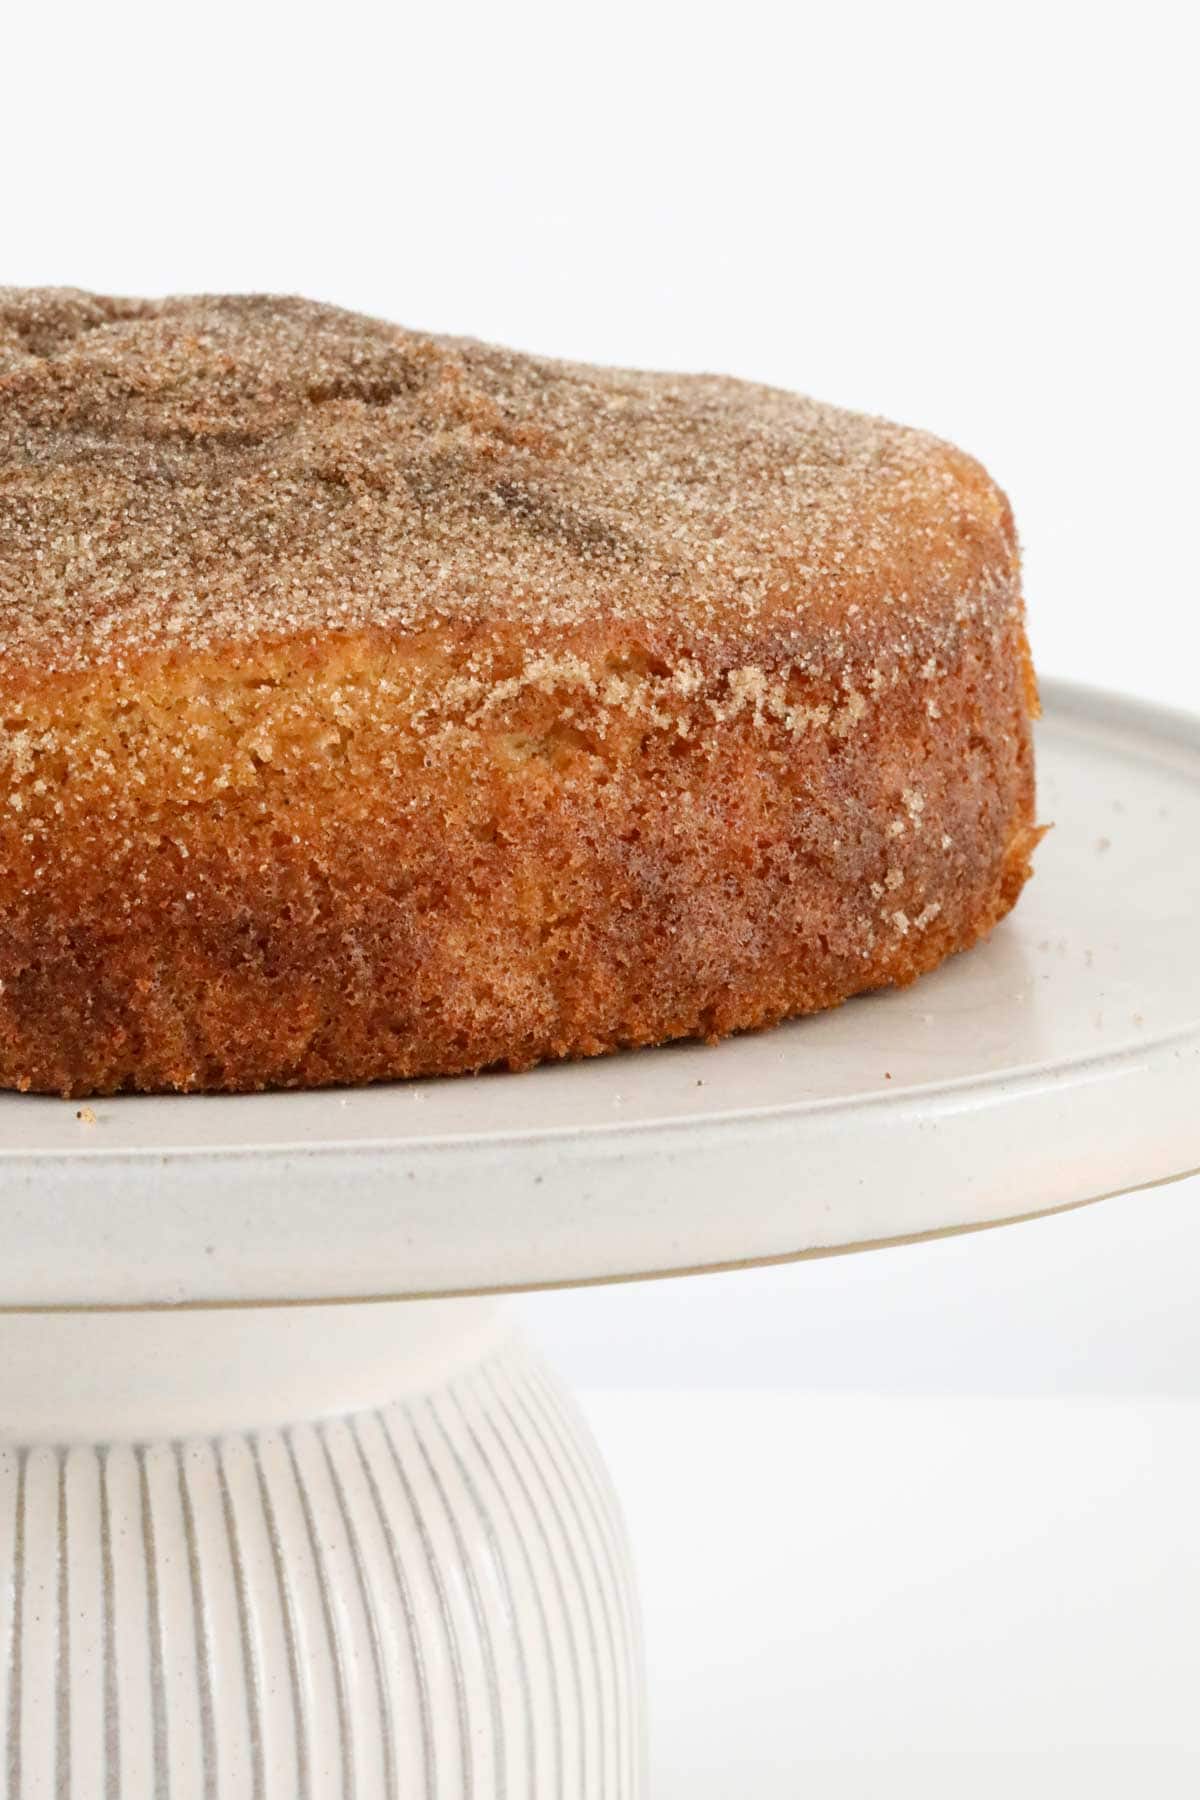 A tea cake with a cinnamon and sugar topping on a white cake stand.